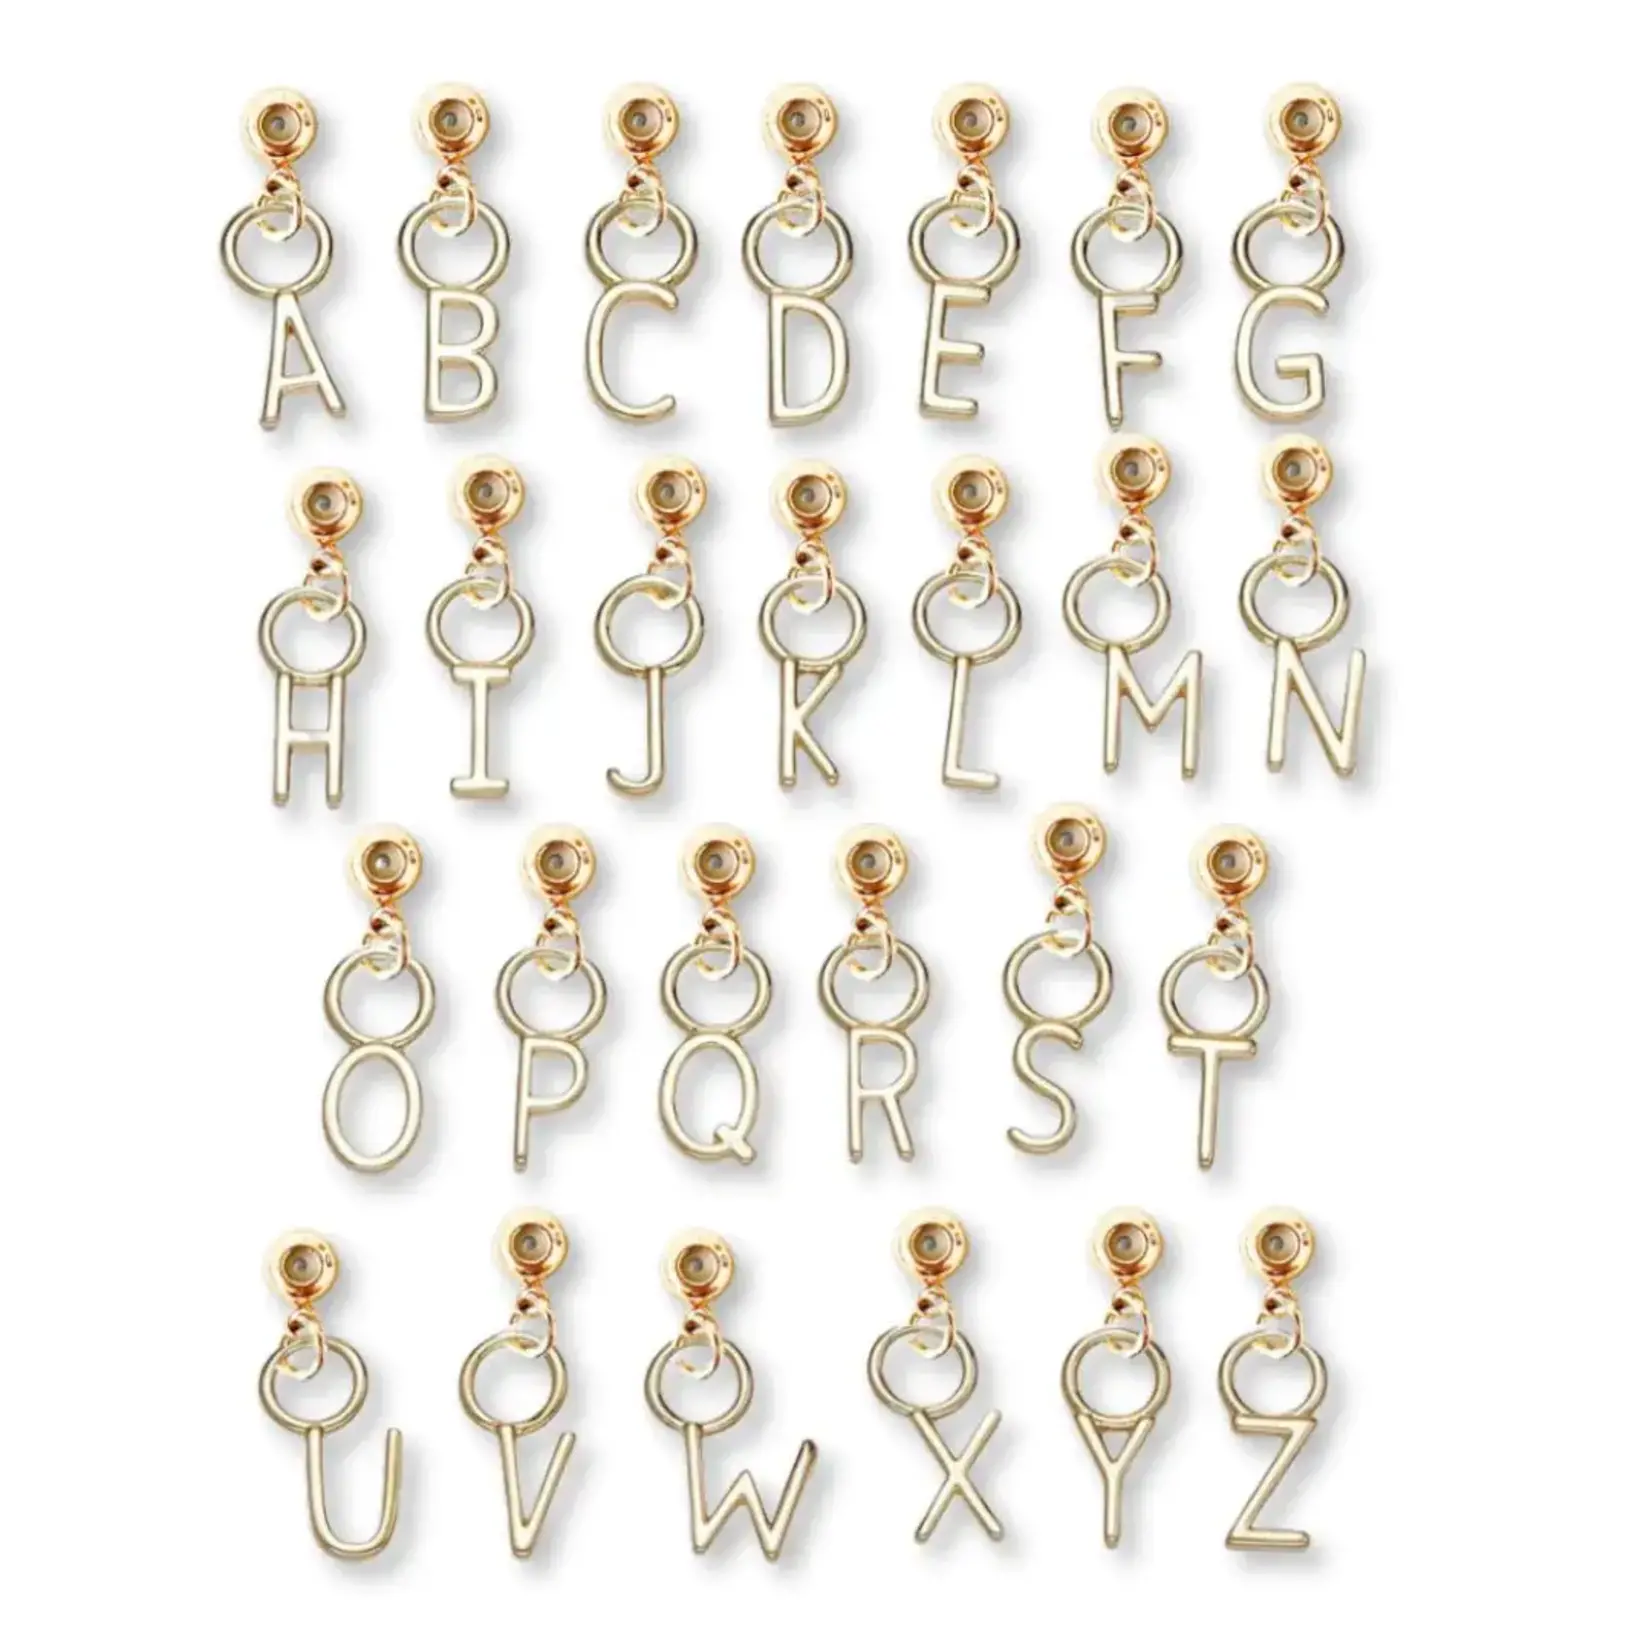 KINSEY DESIGNS SLIDER CHAIN CHARM BRACELET INITIAL CHARMS - Southern  Accents MS